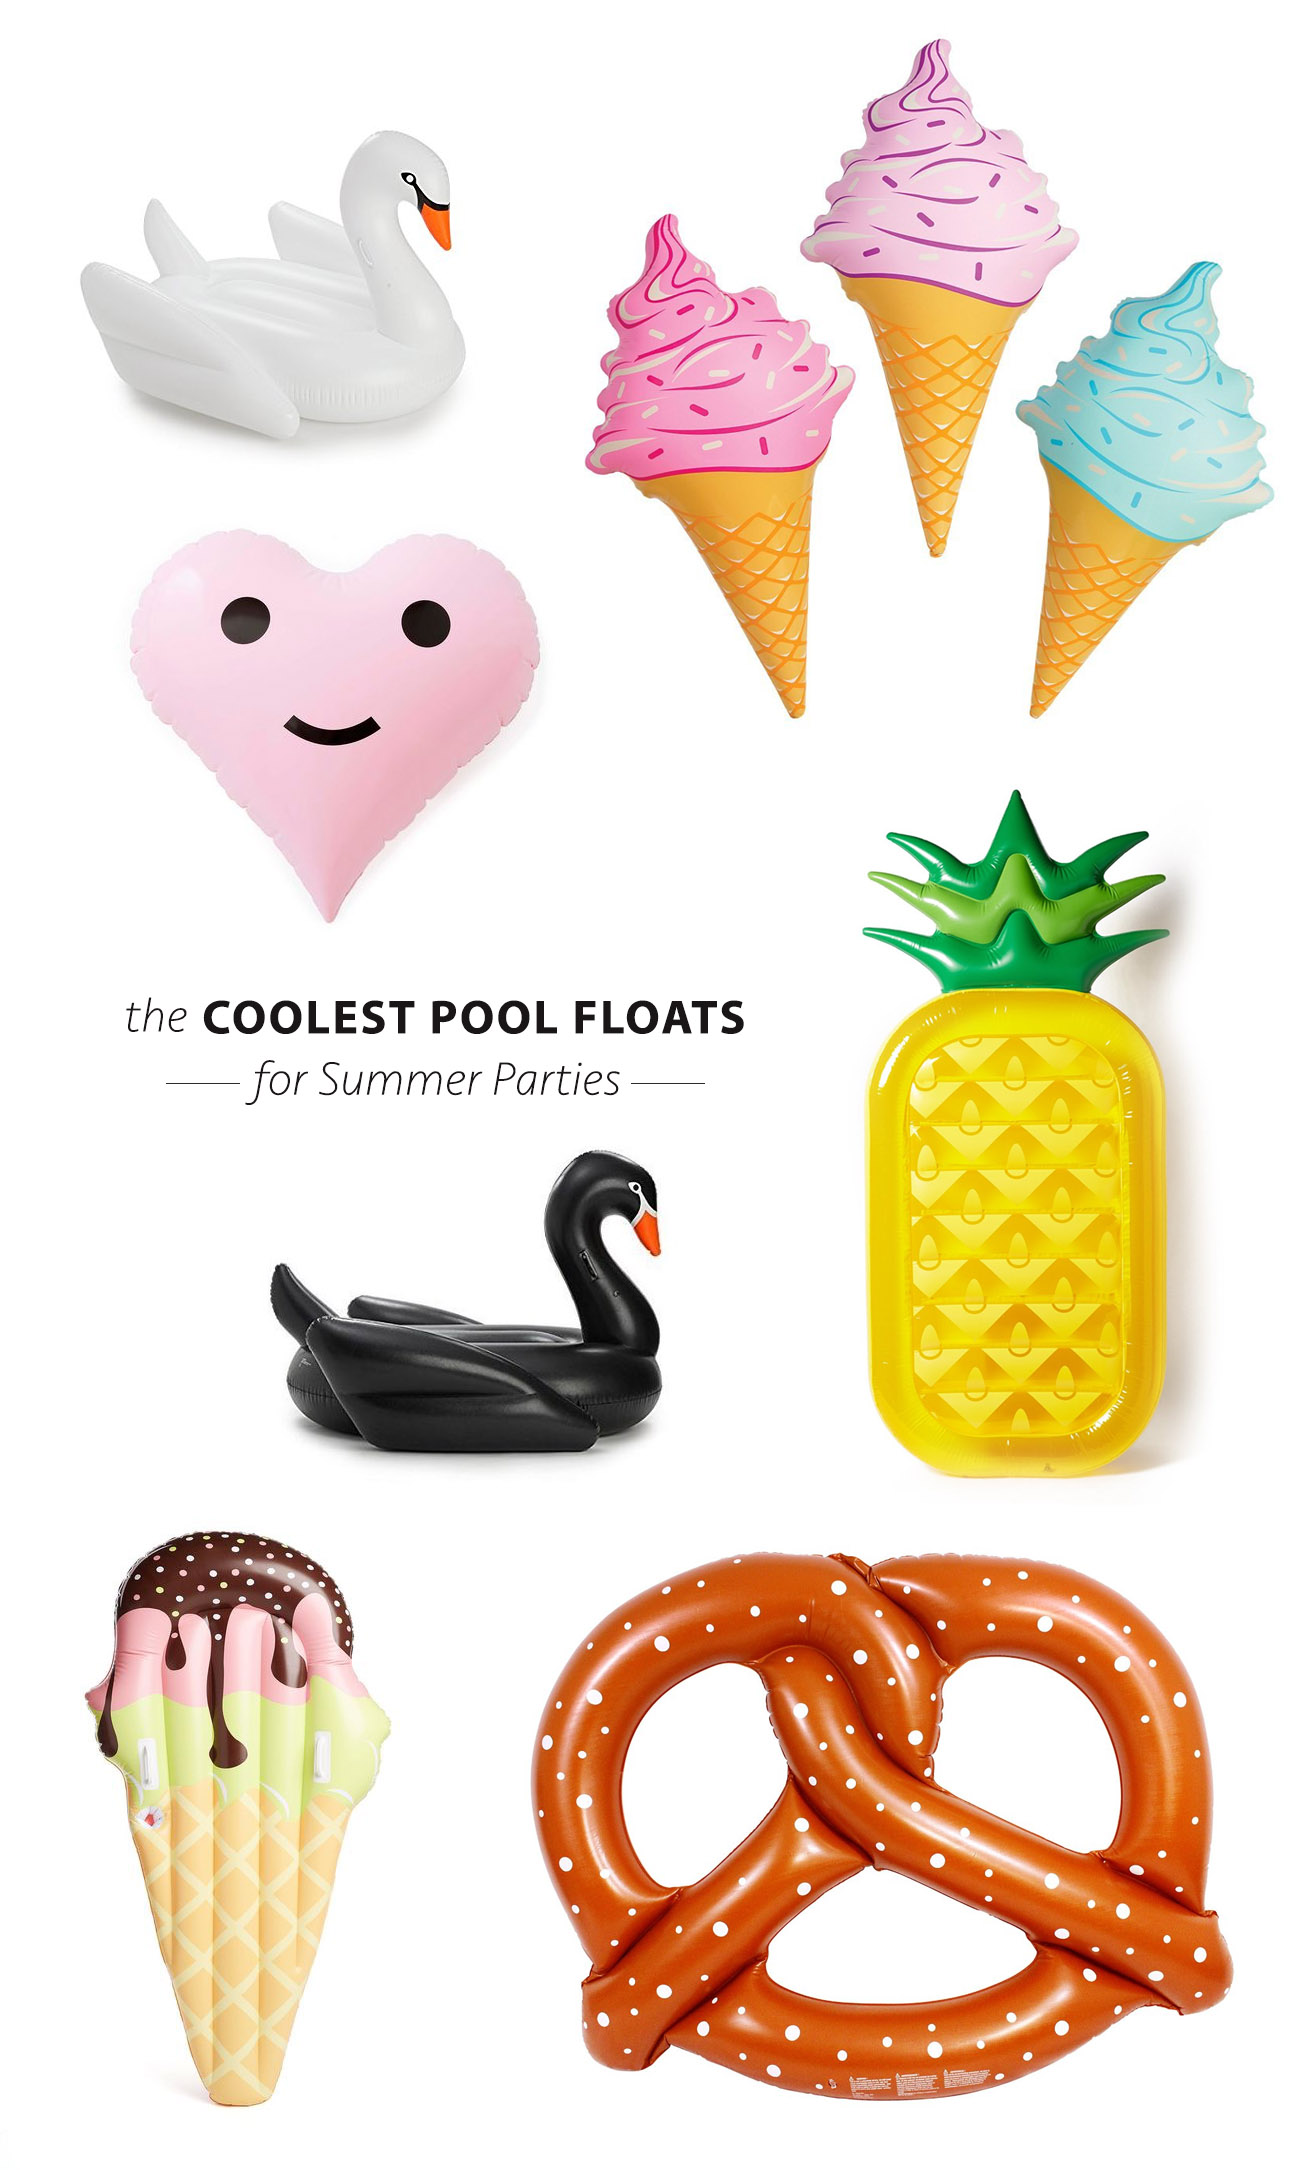 The Coolest Pool Floats for Summer Parties